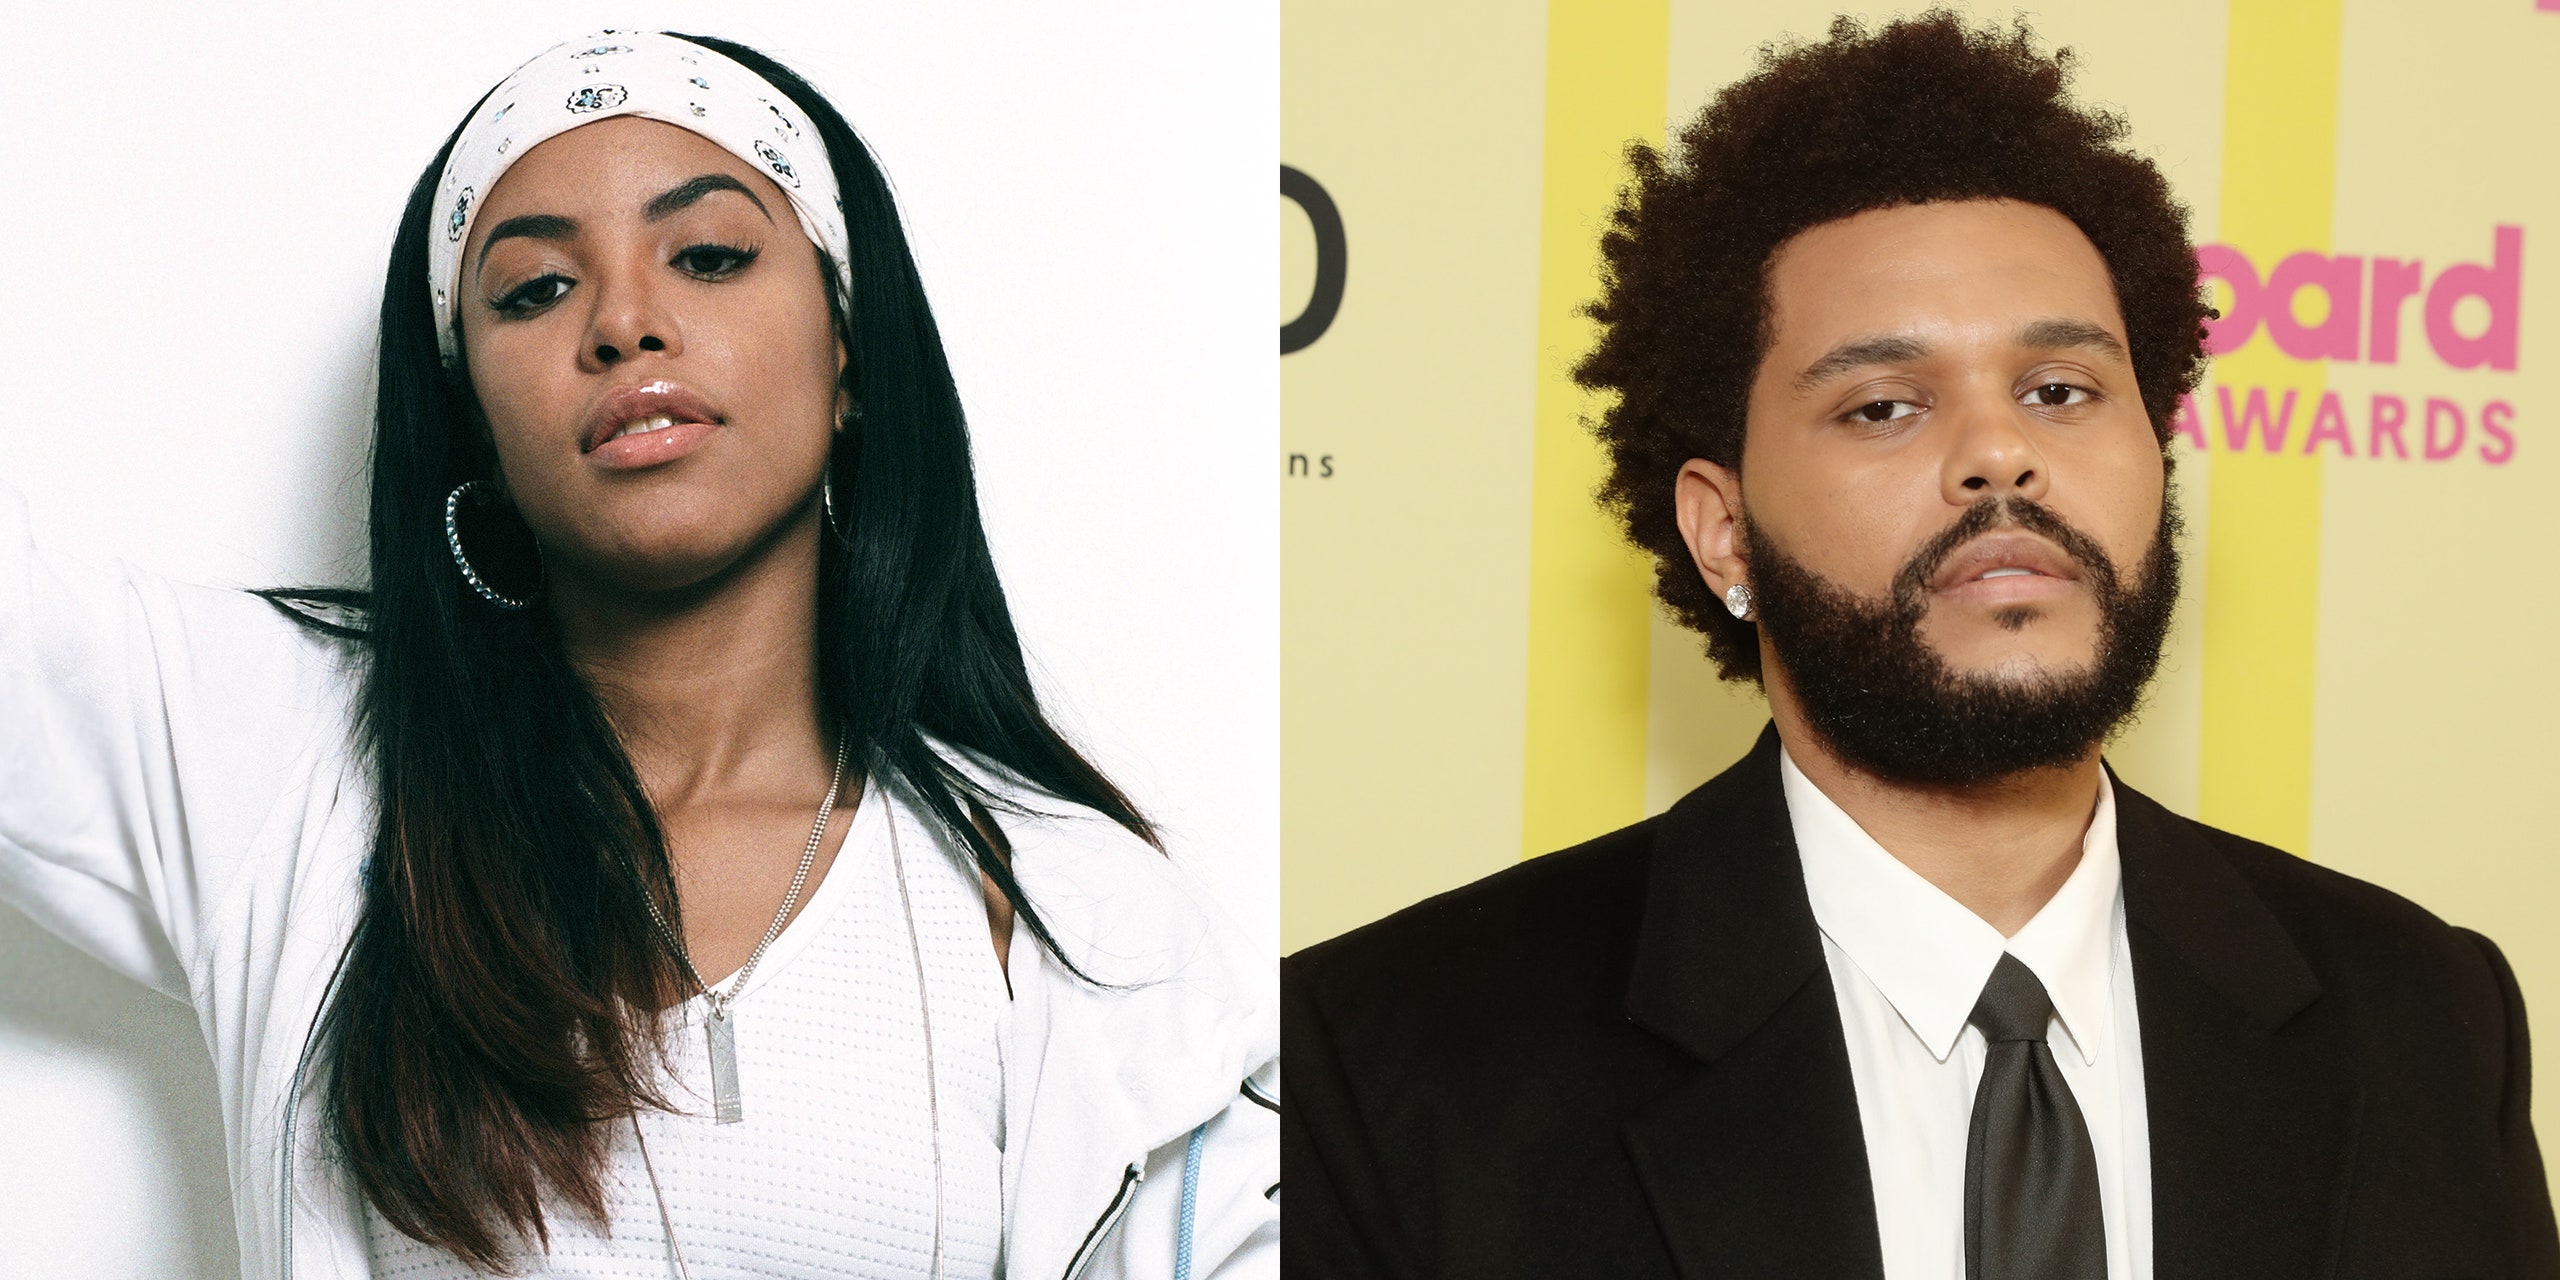 Aaliyah ft The Weeknd…new music from the R&B star 20 years after her death